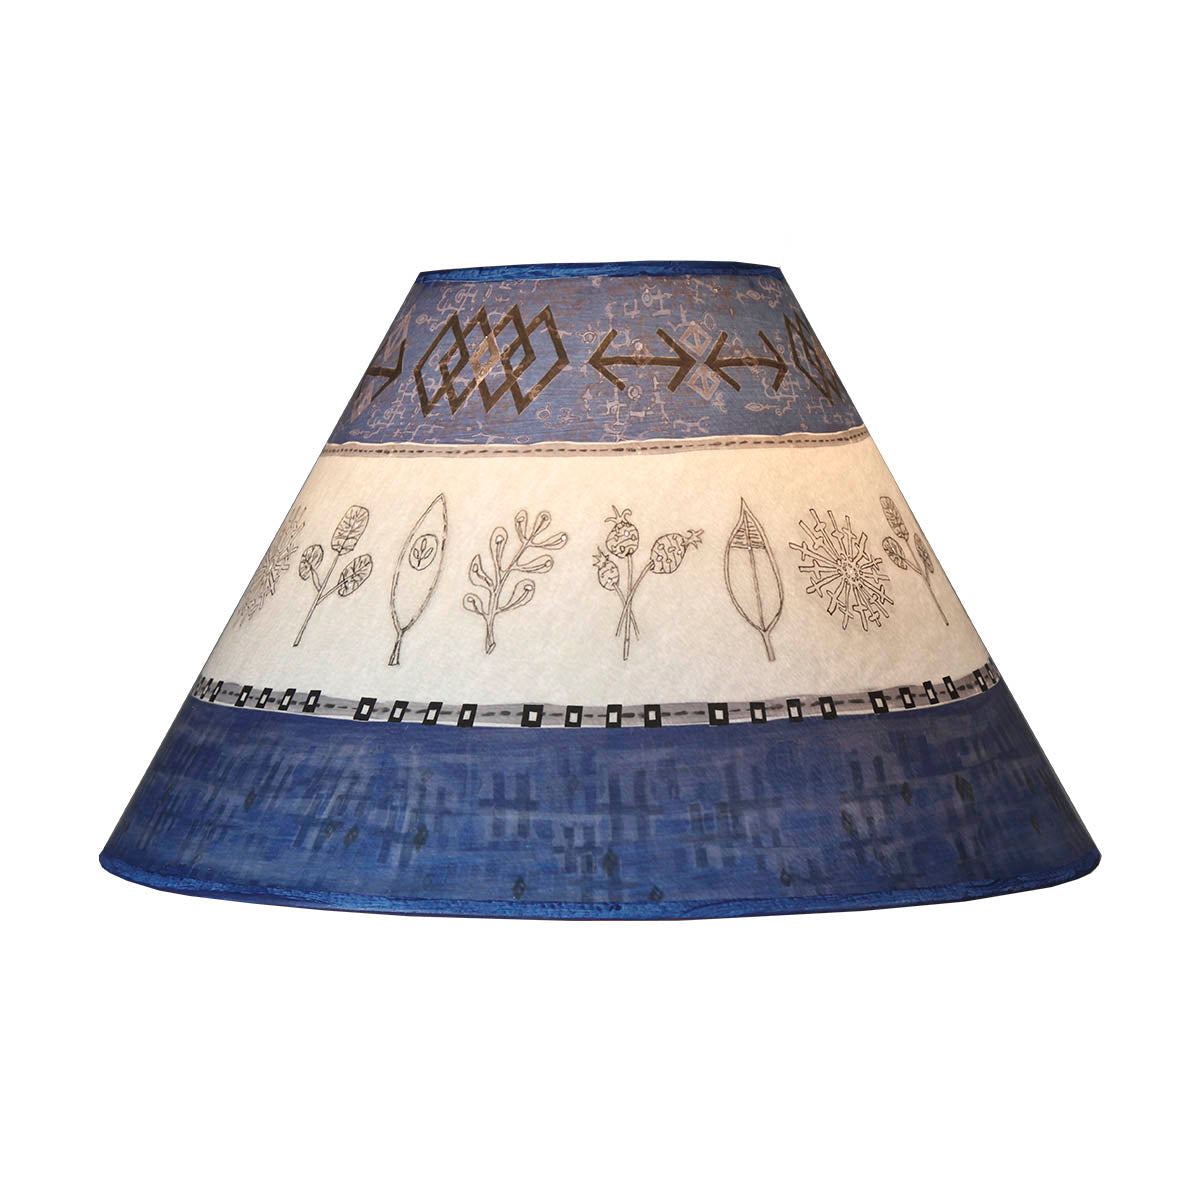 Janna Ugone &amp; Co Lamp Shades Medium Conical Lamp Shade in Woven &amp; Sprig in Sapphire